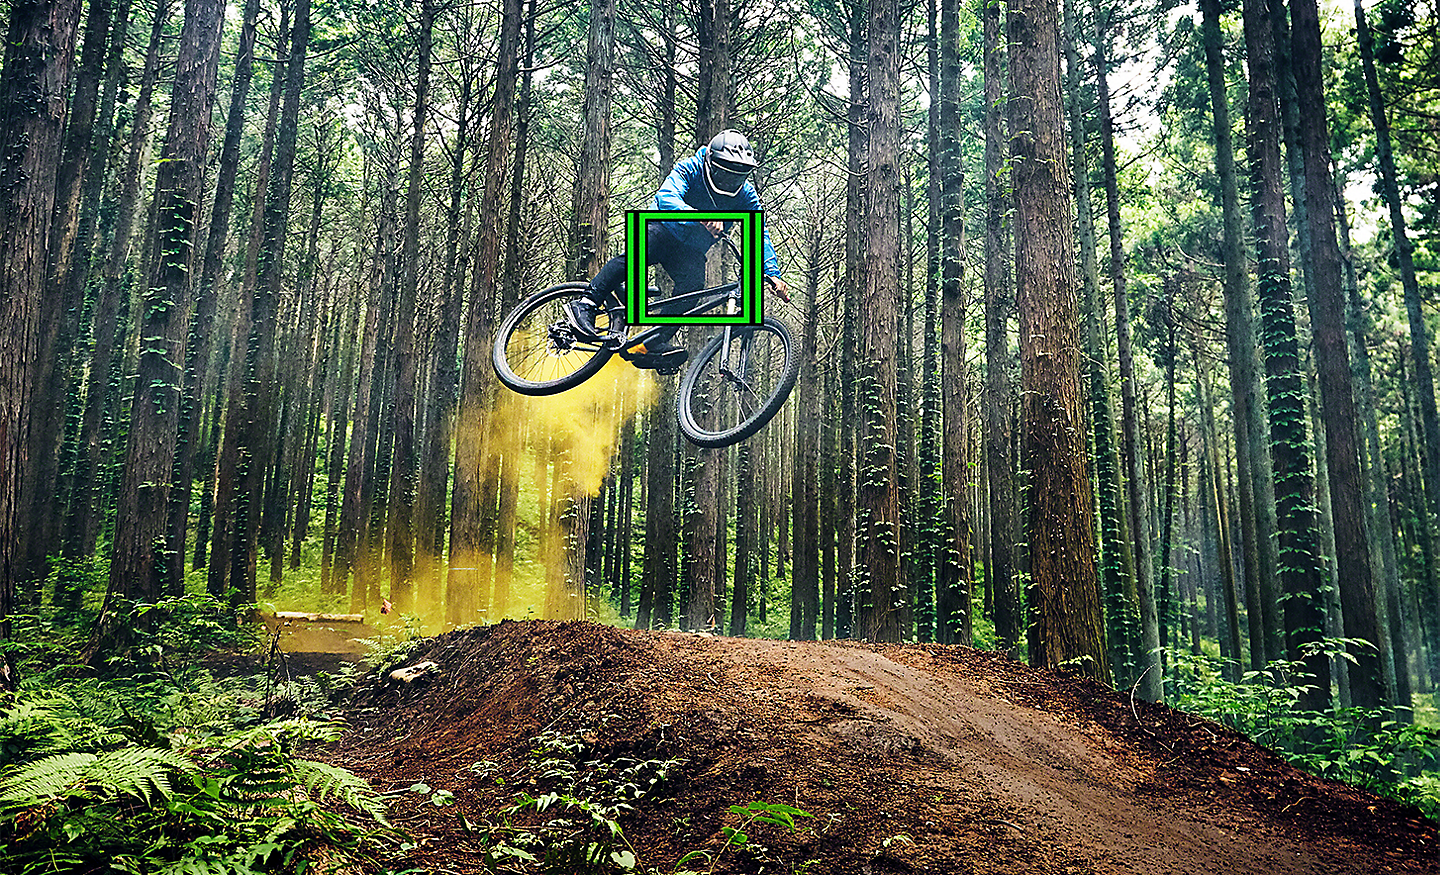 Mountain biker jumping in a forest with green square indicating Real-time Tracking